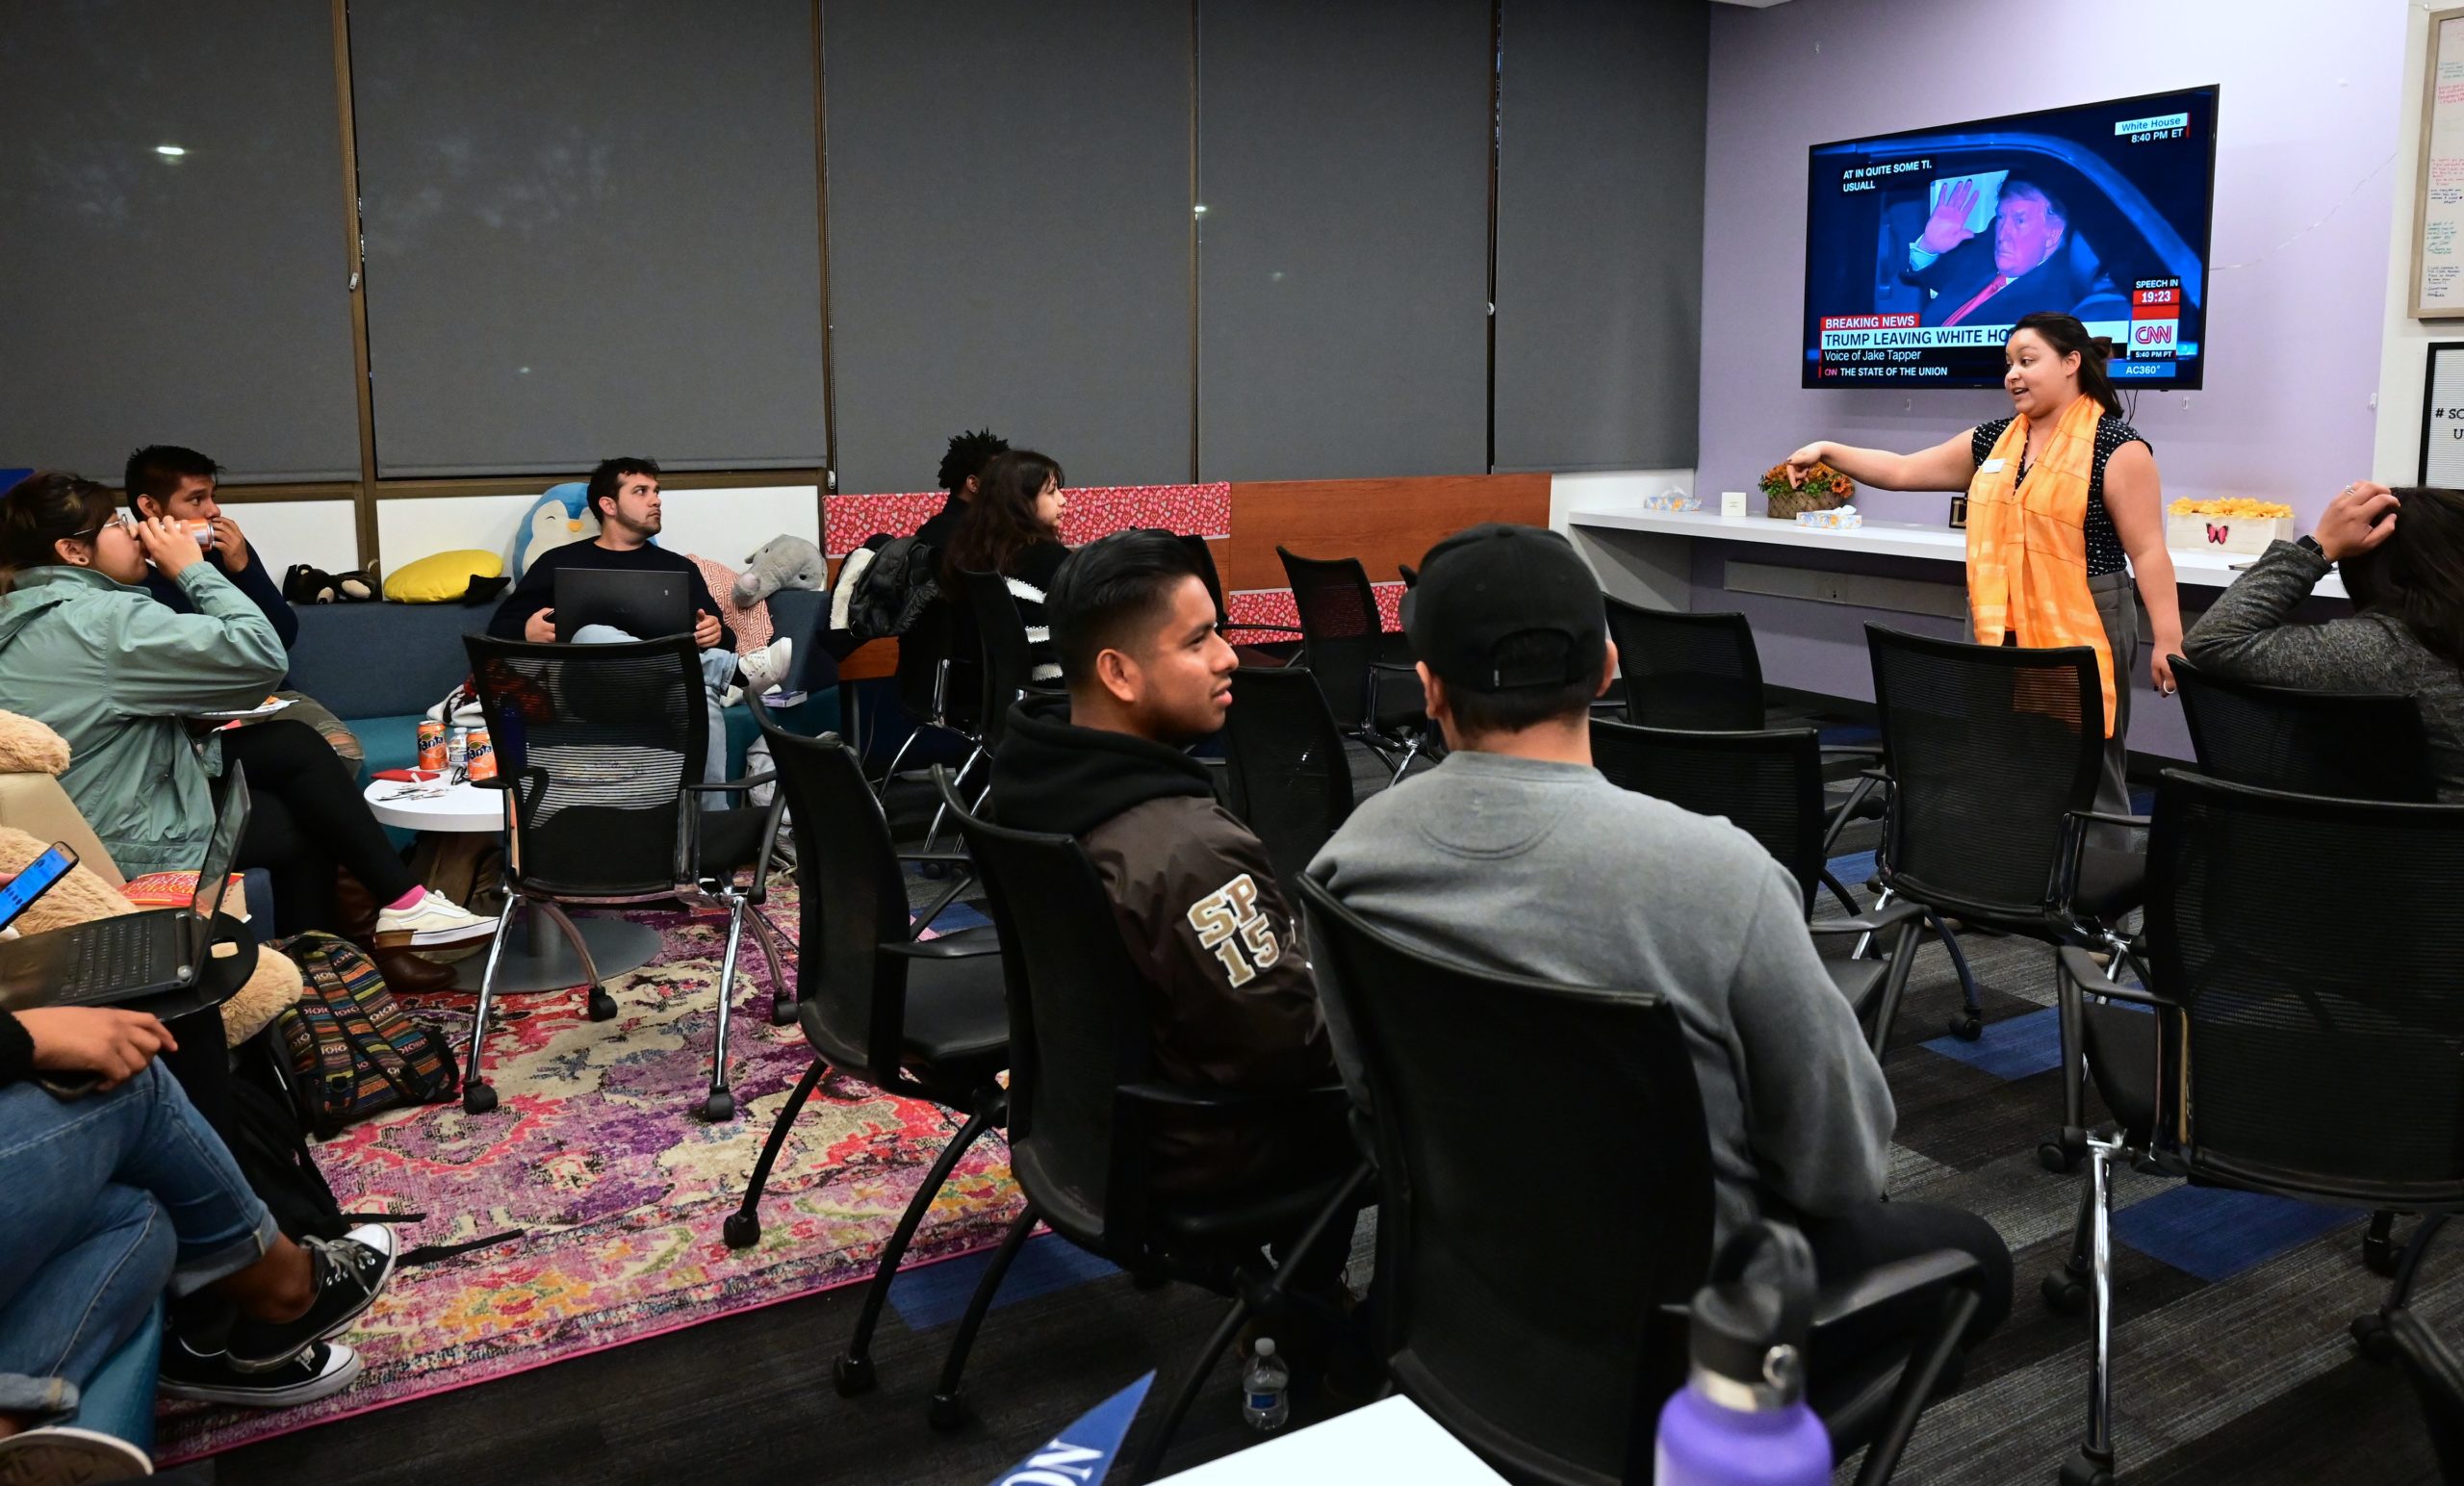 California State University Fullerton students gather for a State of the Union watch party at the Dreamers Research center on campus in Fullerton, California on February 5, 2019. - US President Donald Trump is seen waving on the screen on his way to speak at the State of the Union address. Dreamers Research Center coordinator Martha Perez, seen gesturing, attended the State of the Union address two years ago as a guest of Ventura County Representative Julia Brownley. (Photo by Frederic J. BROWN / AFP) (Photo credit should read FREDERIC J. BROWN/AFP via Getty Images)